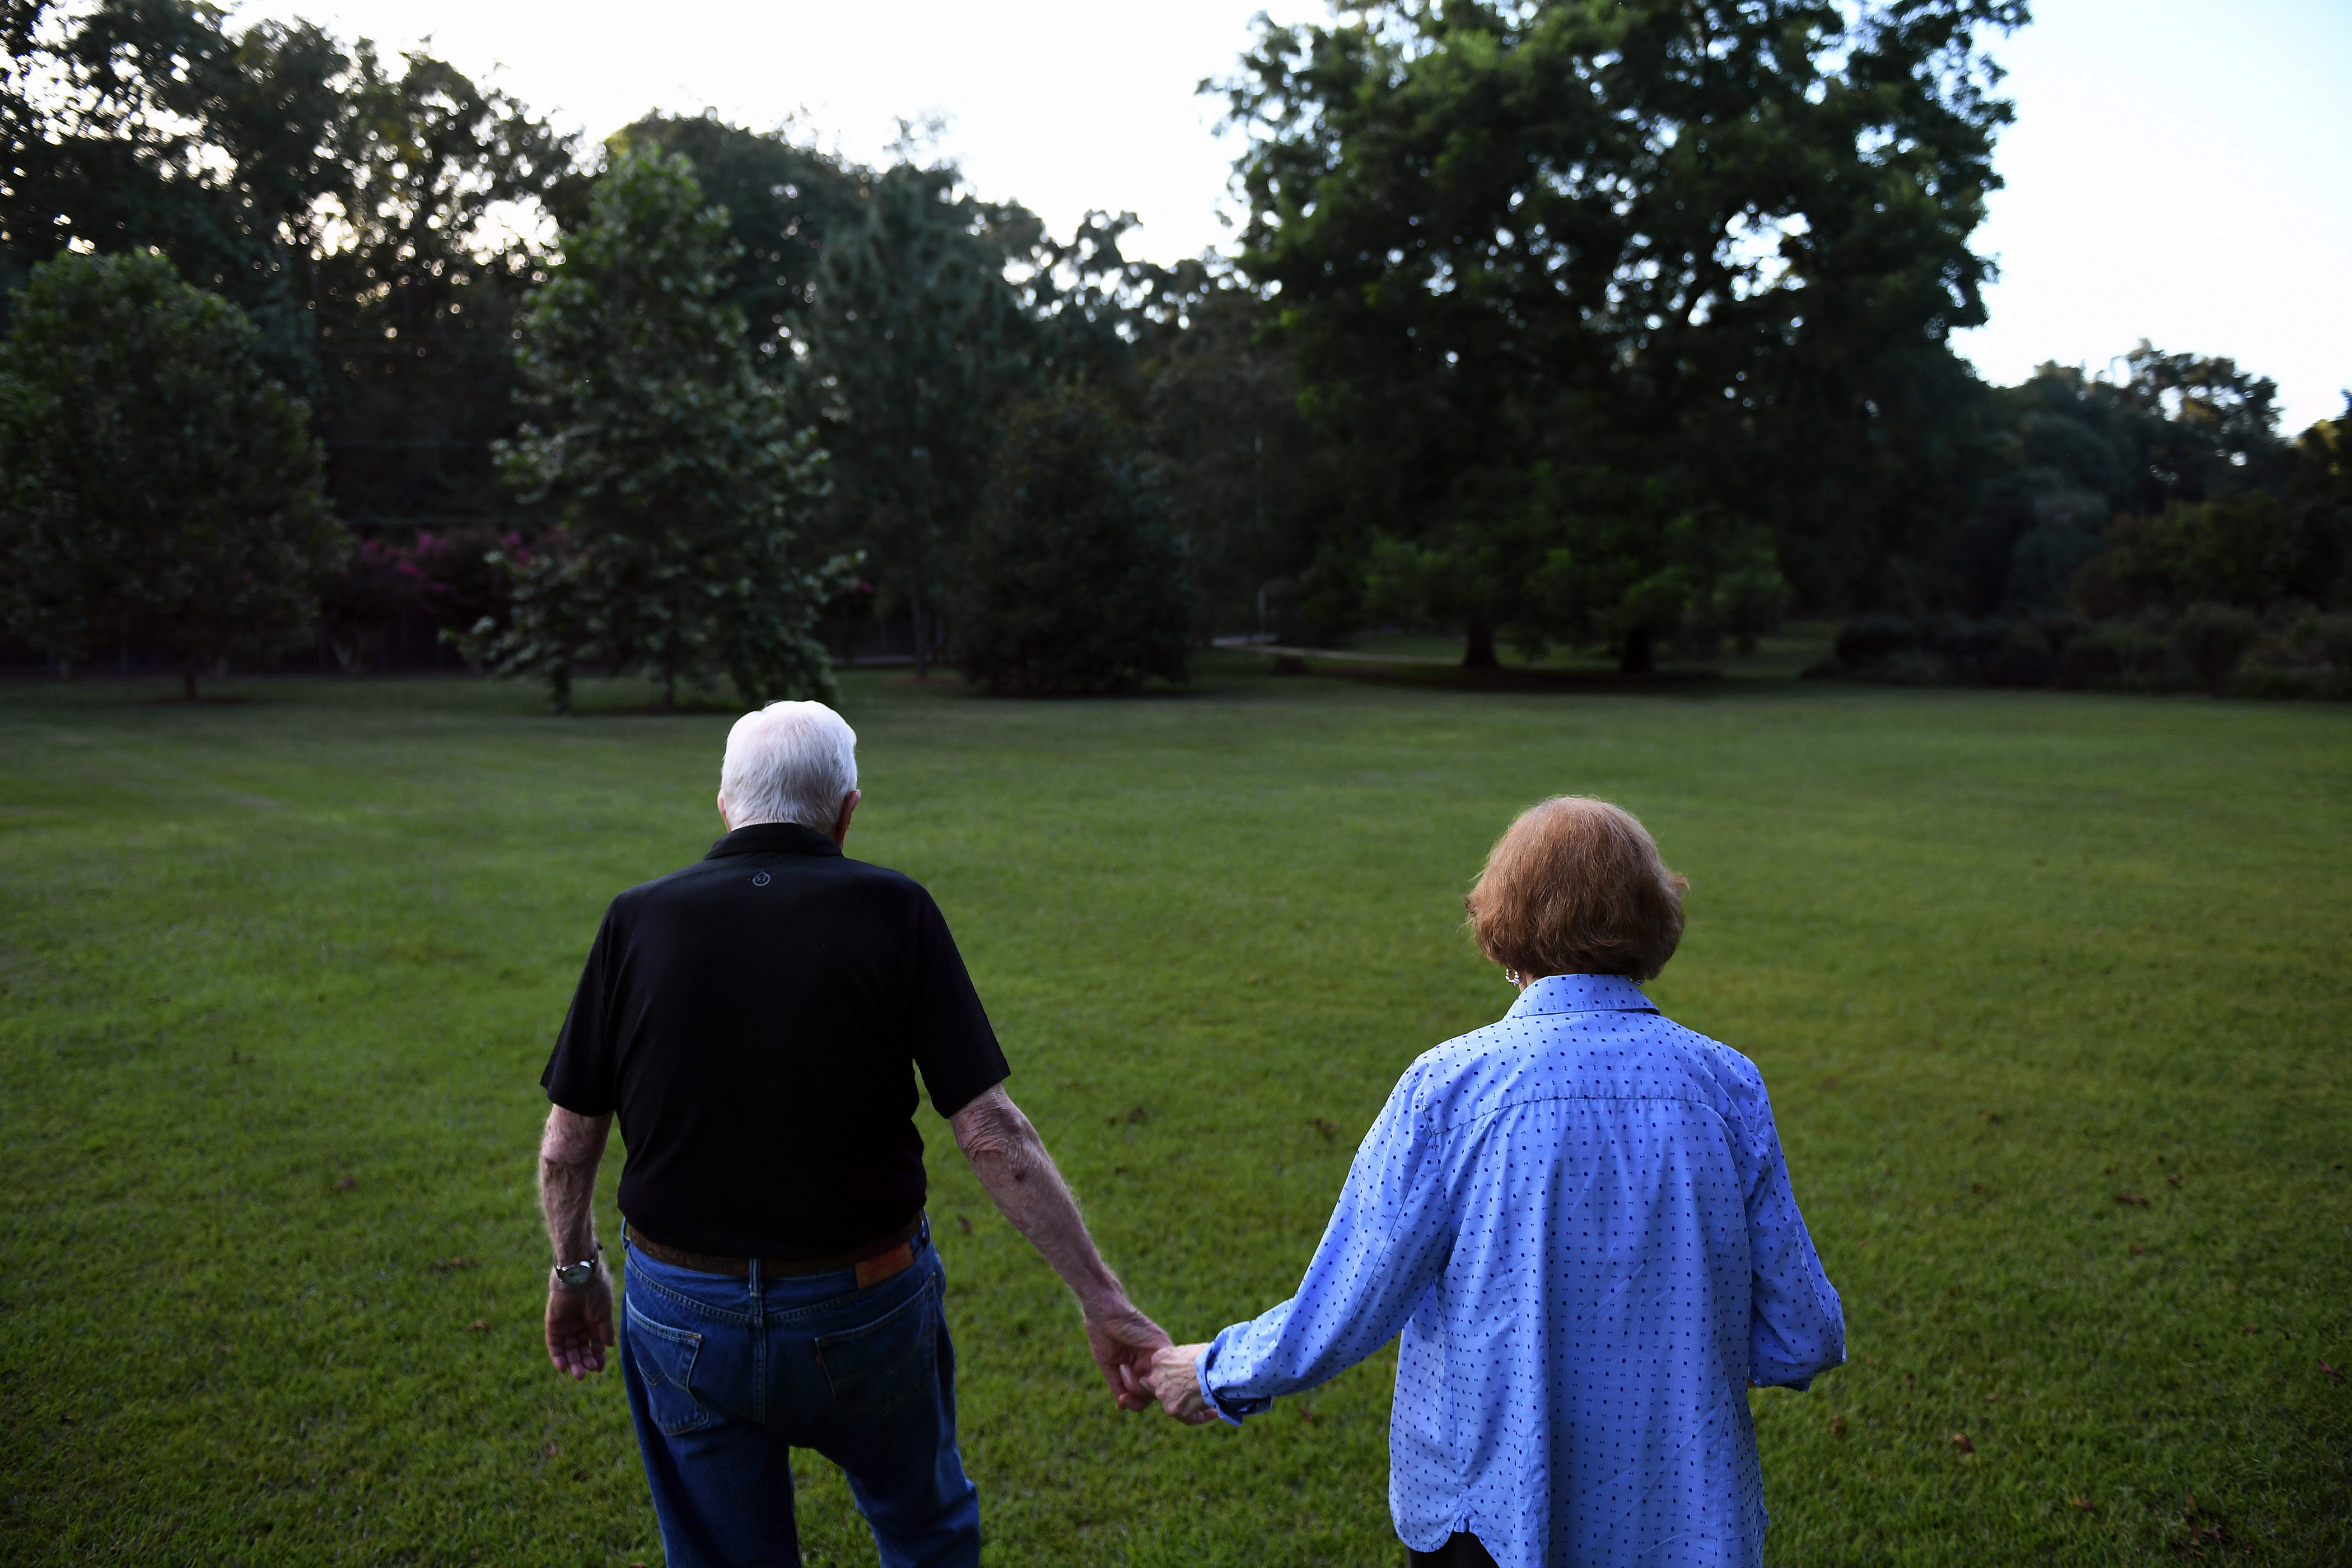 Jimmy and Rosalynn Carter walking to their home in Plains, Georgia, 2018. | Source: Getty Images